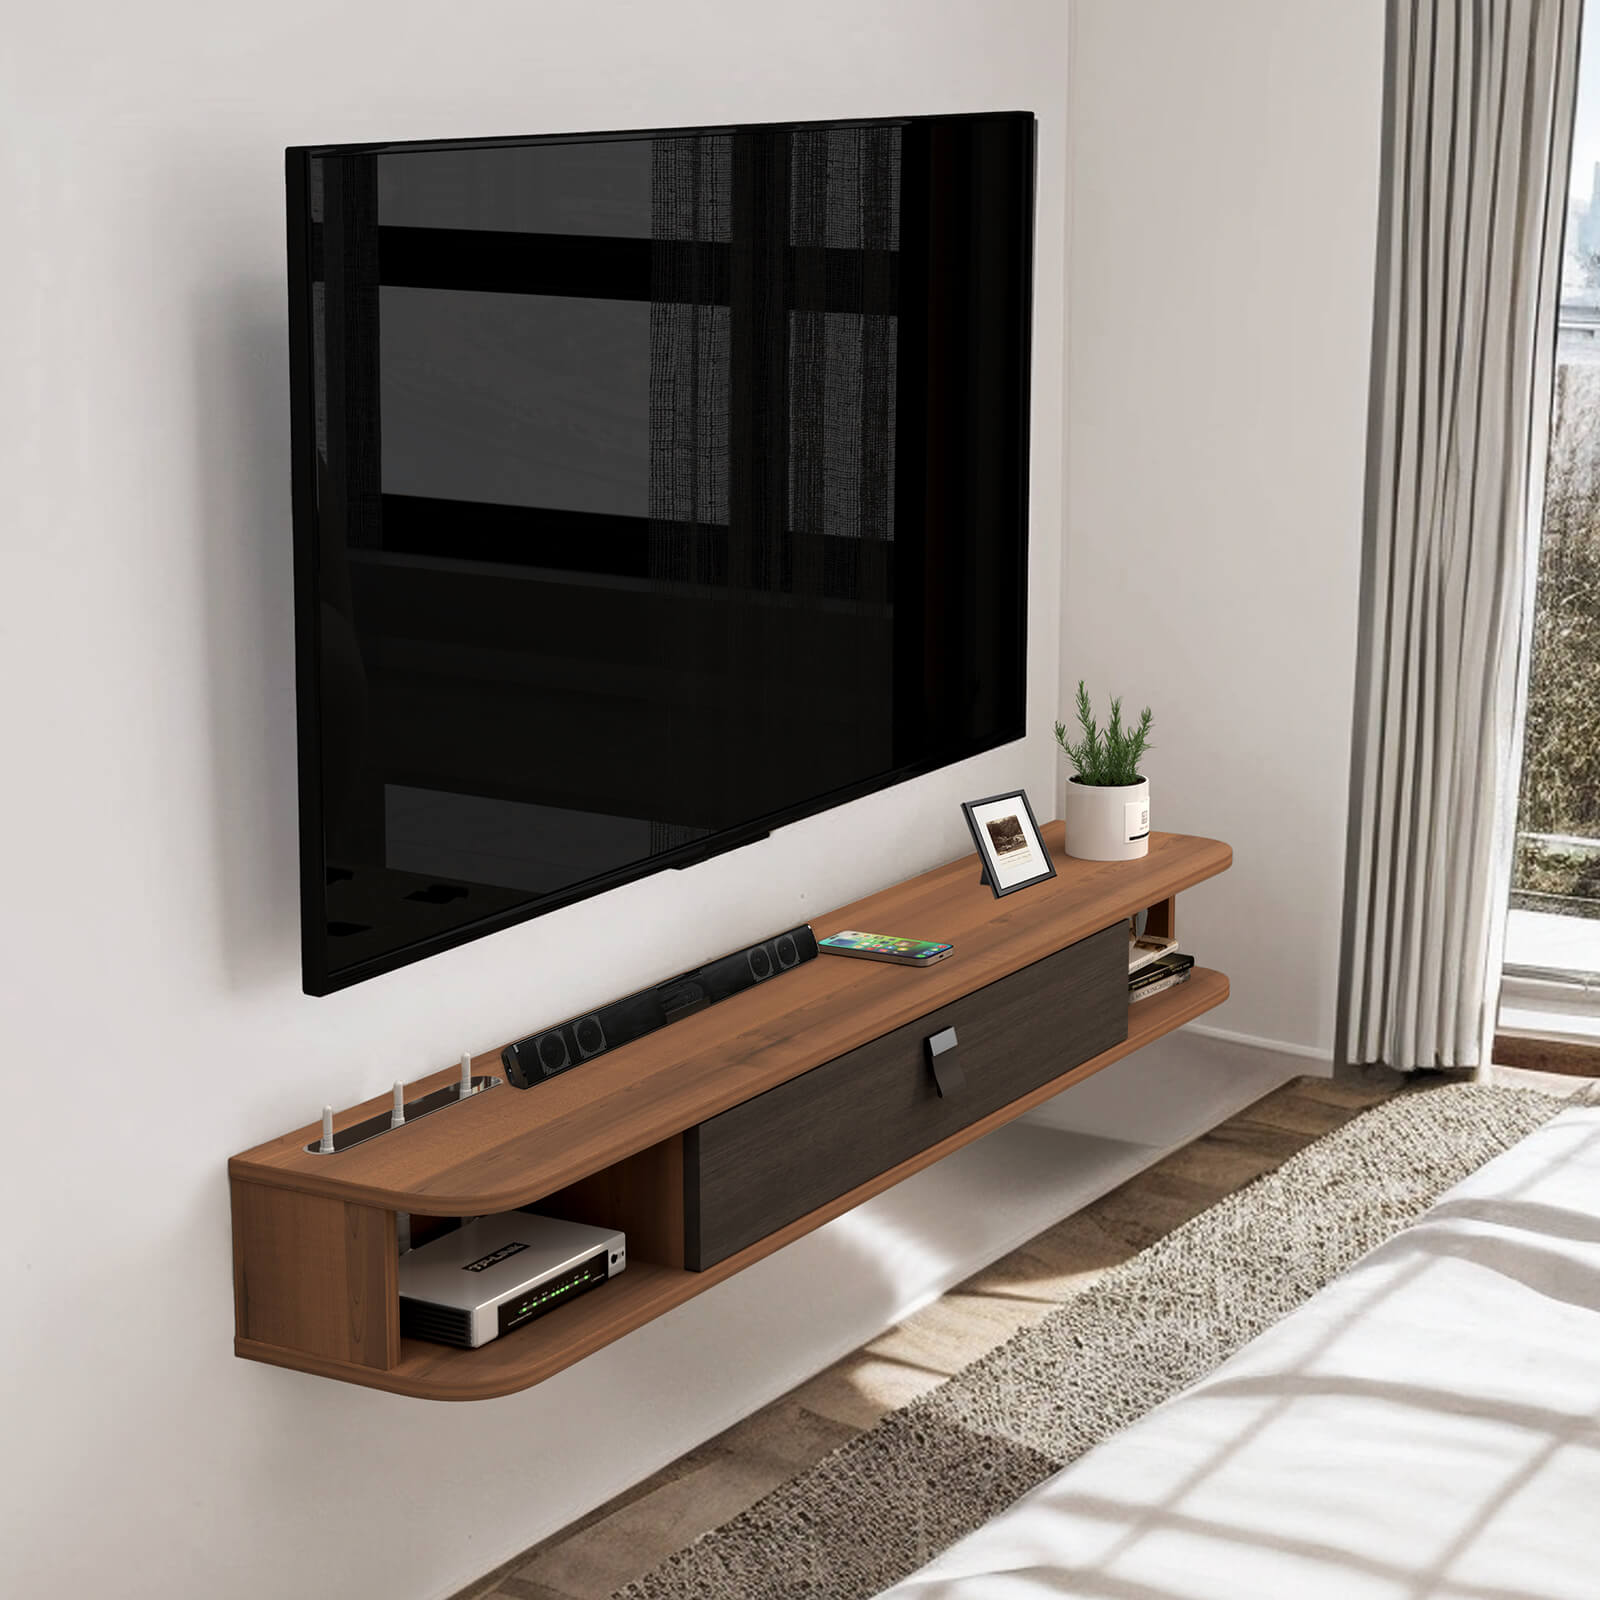 55.12" Walnut Plywood Slim Floating TV Stand for 55" 60" TV